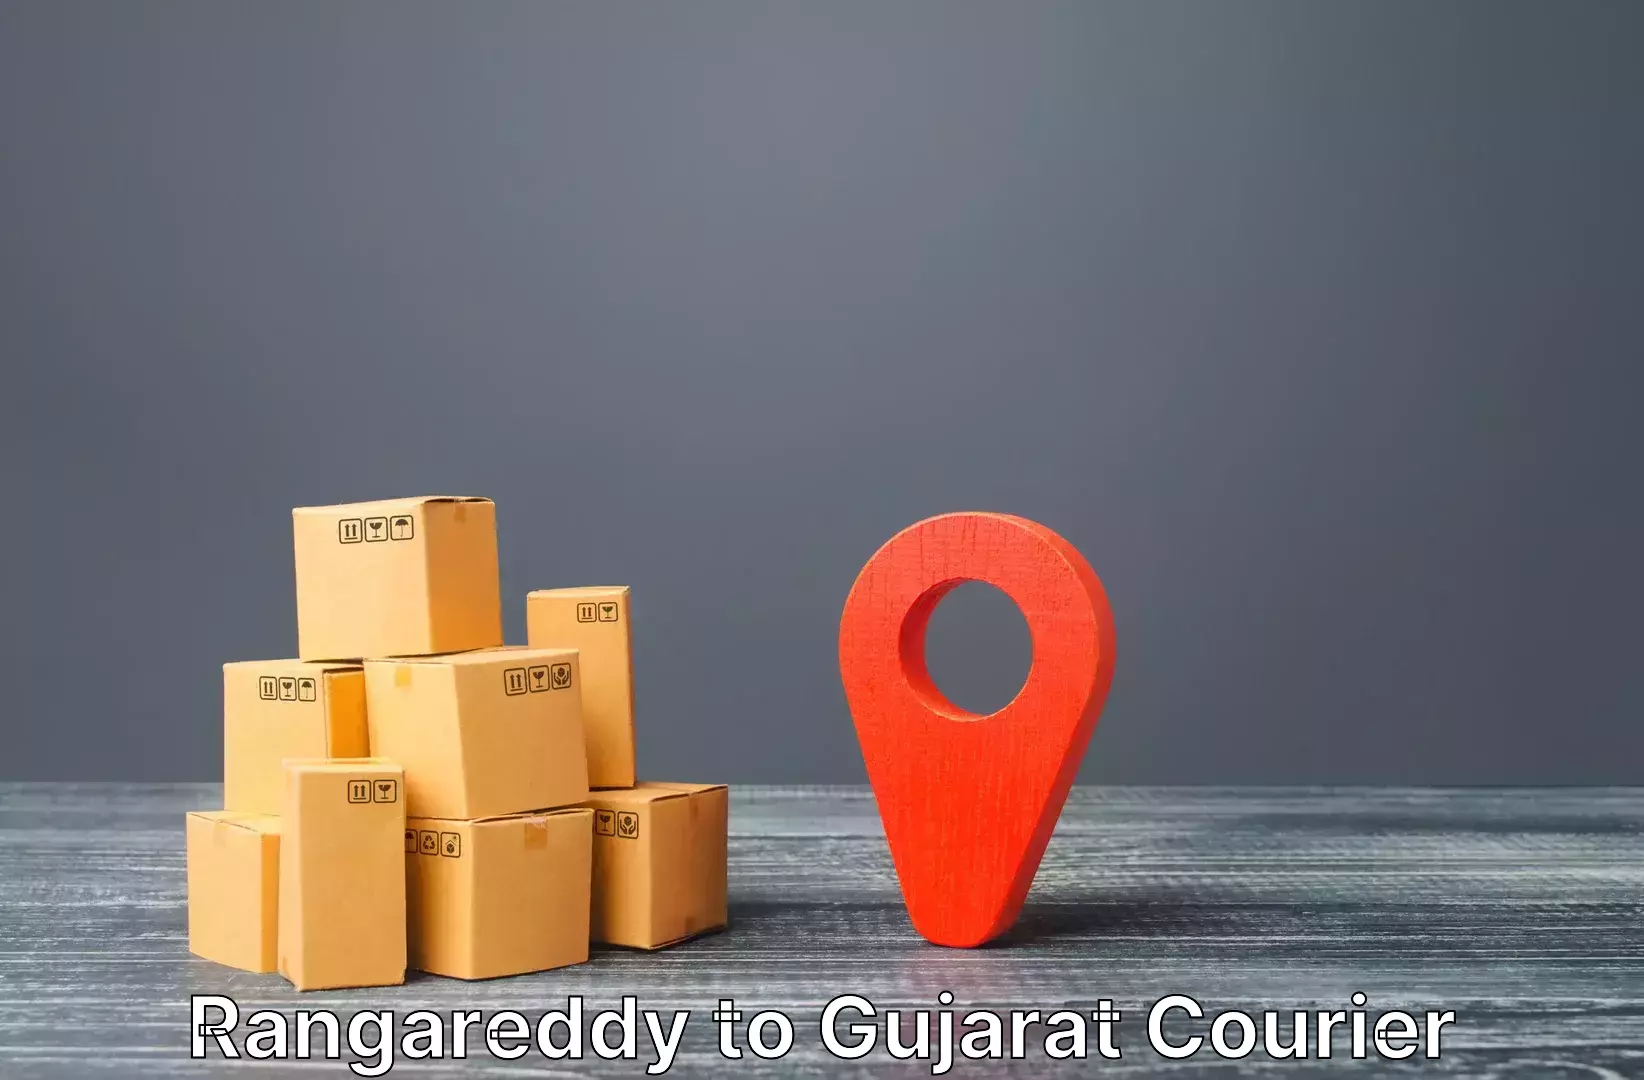 Baggage delivery technology Rangareddy to Keshod